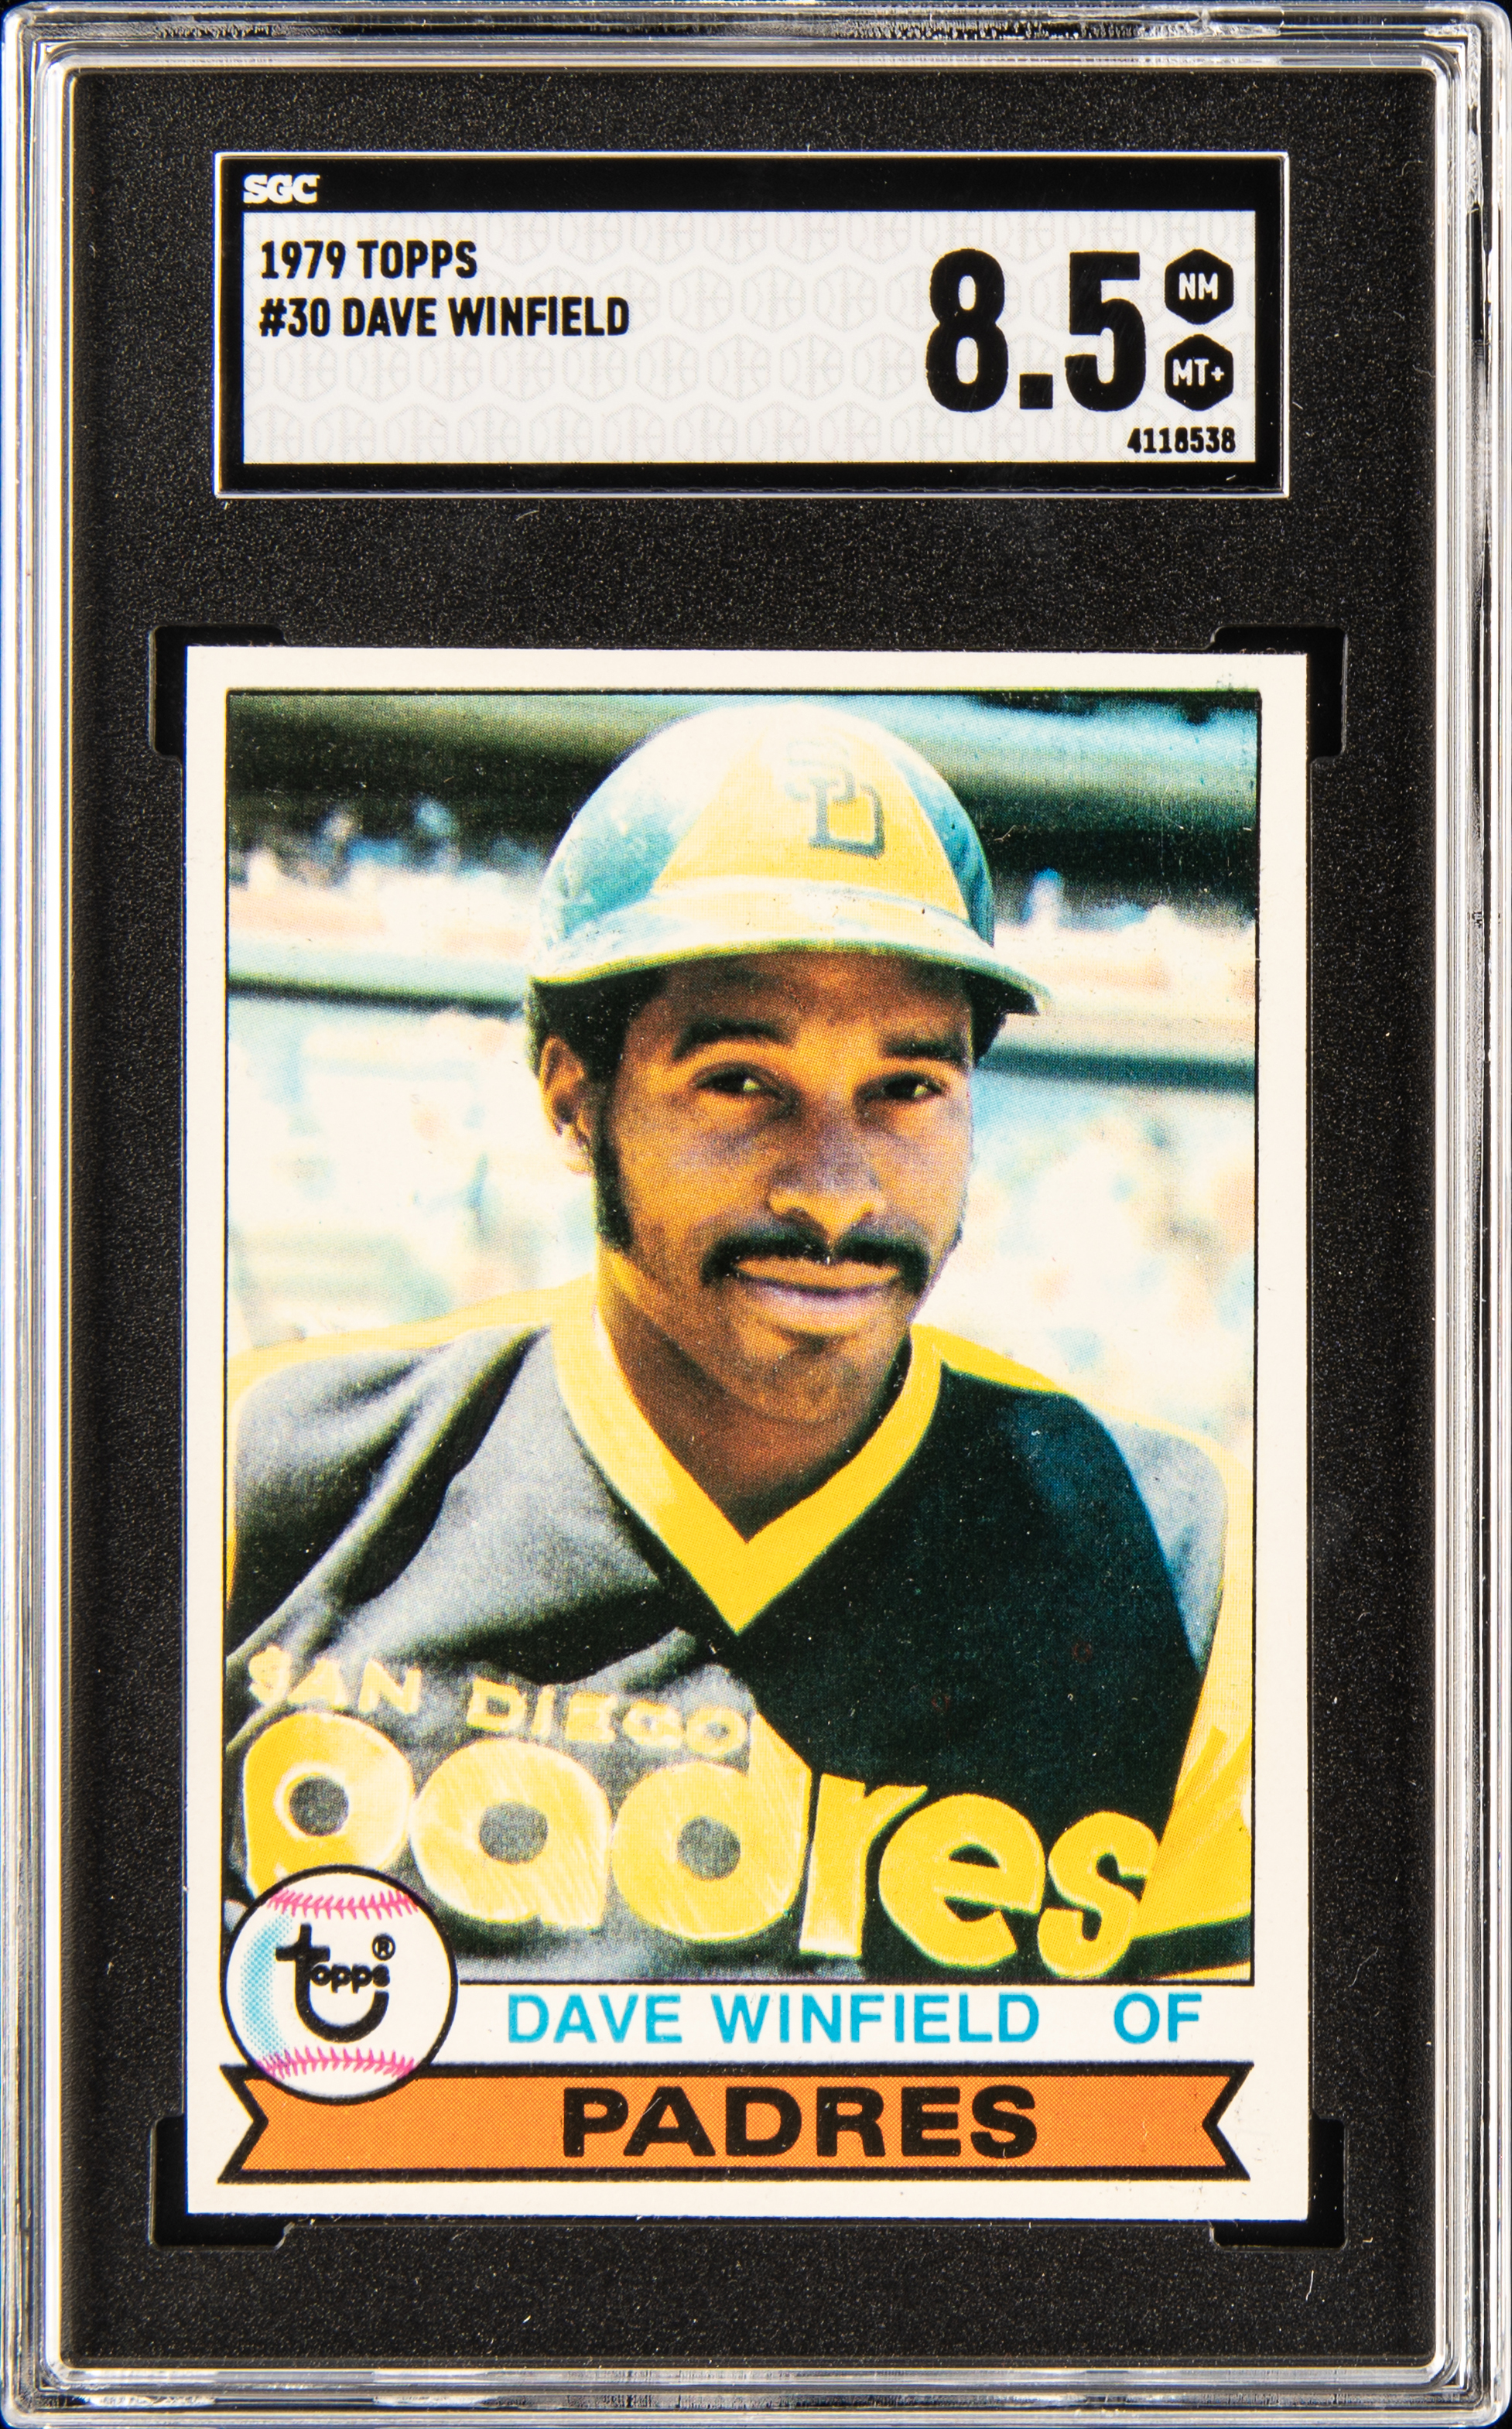 1979 Topps #30 Dave Winfield – SGC NM-MT+ 8.5